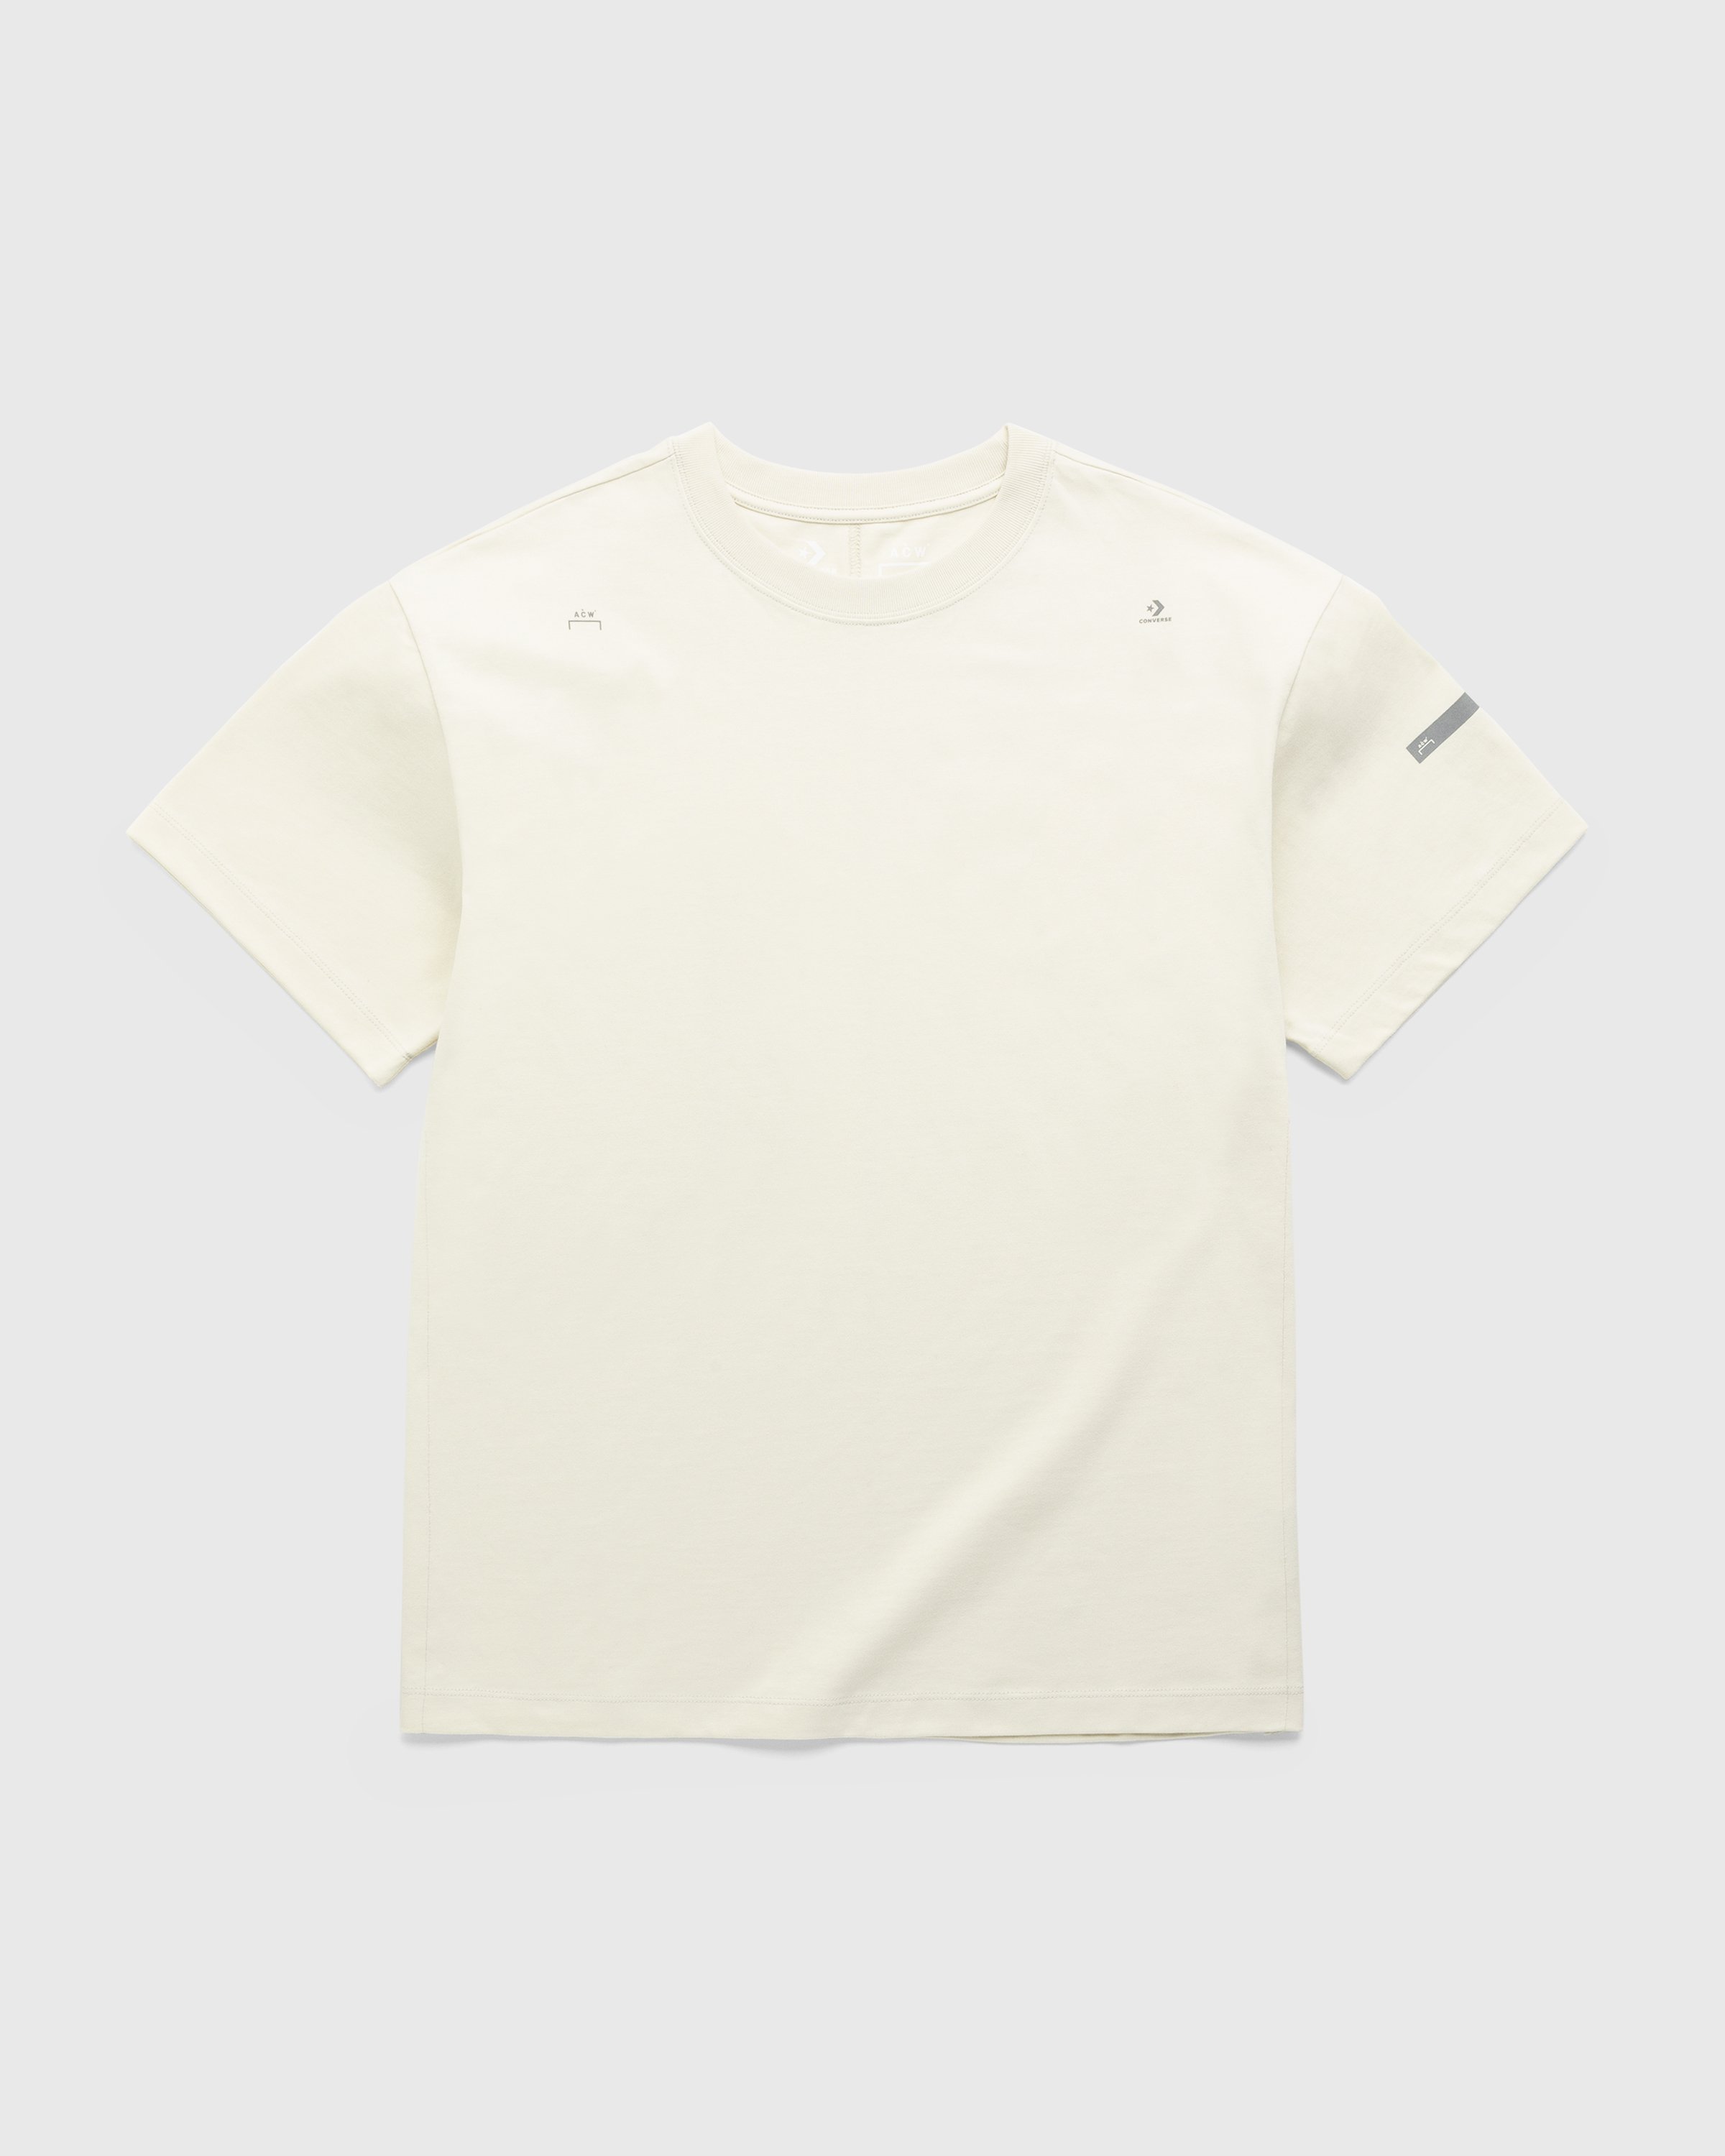 Converse x A-Cold-Wall* - Reflective Tee Bone White - Clothing - White - Image 1